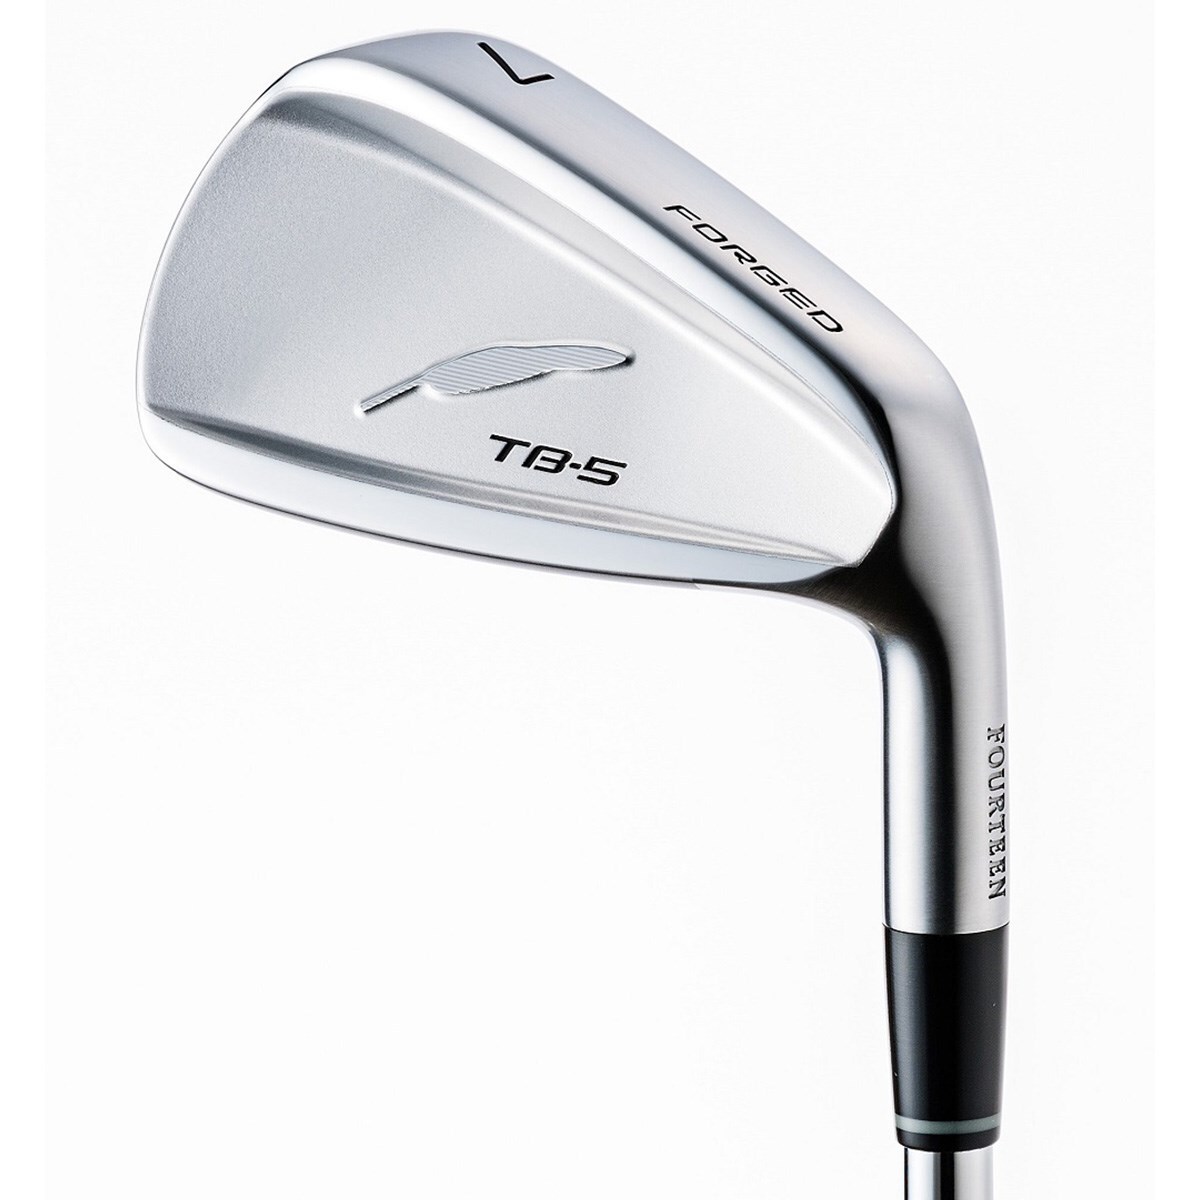 TB-5 FORGED アイアン(5本セット) N.S.PRO MODUS3 TOUR 120 納期:受注後約17週間(アイアンセット)